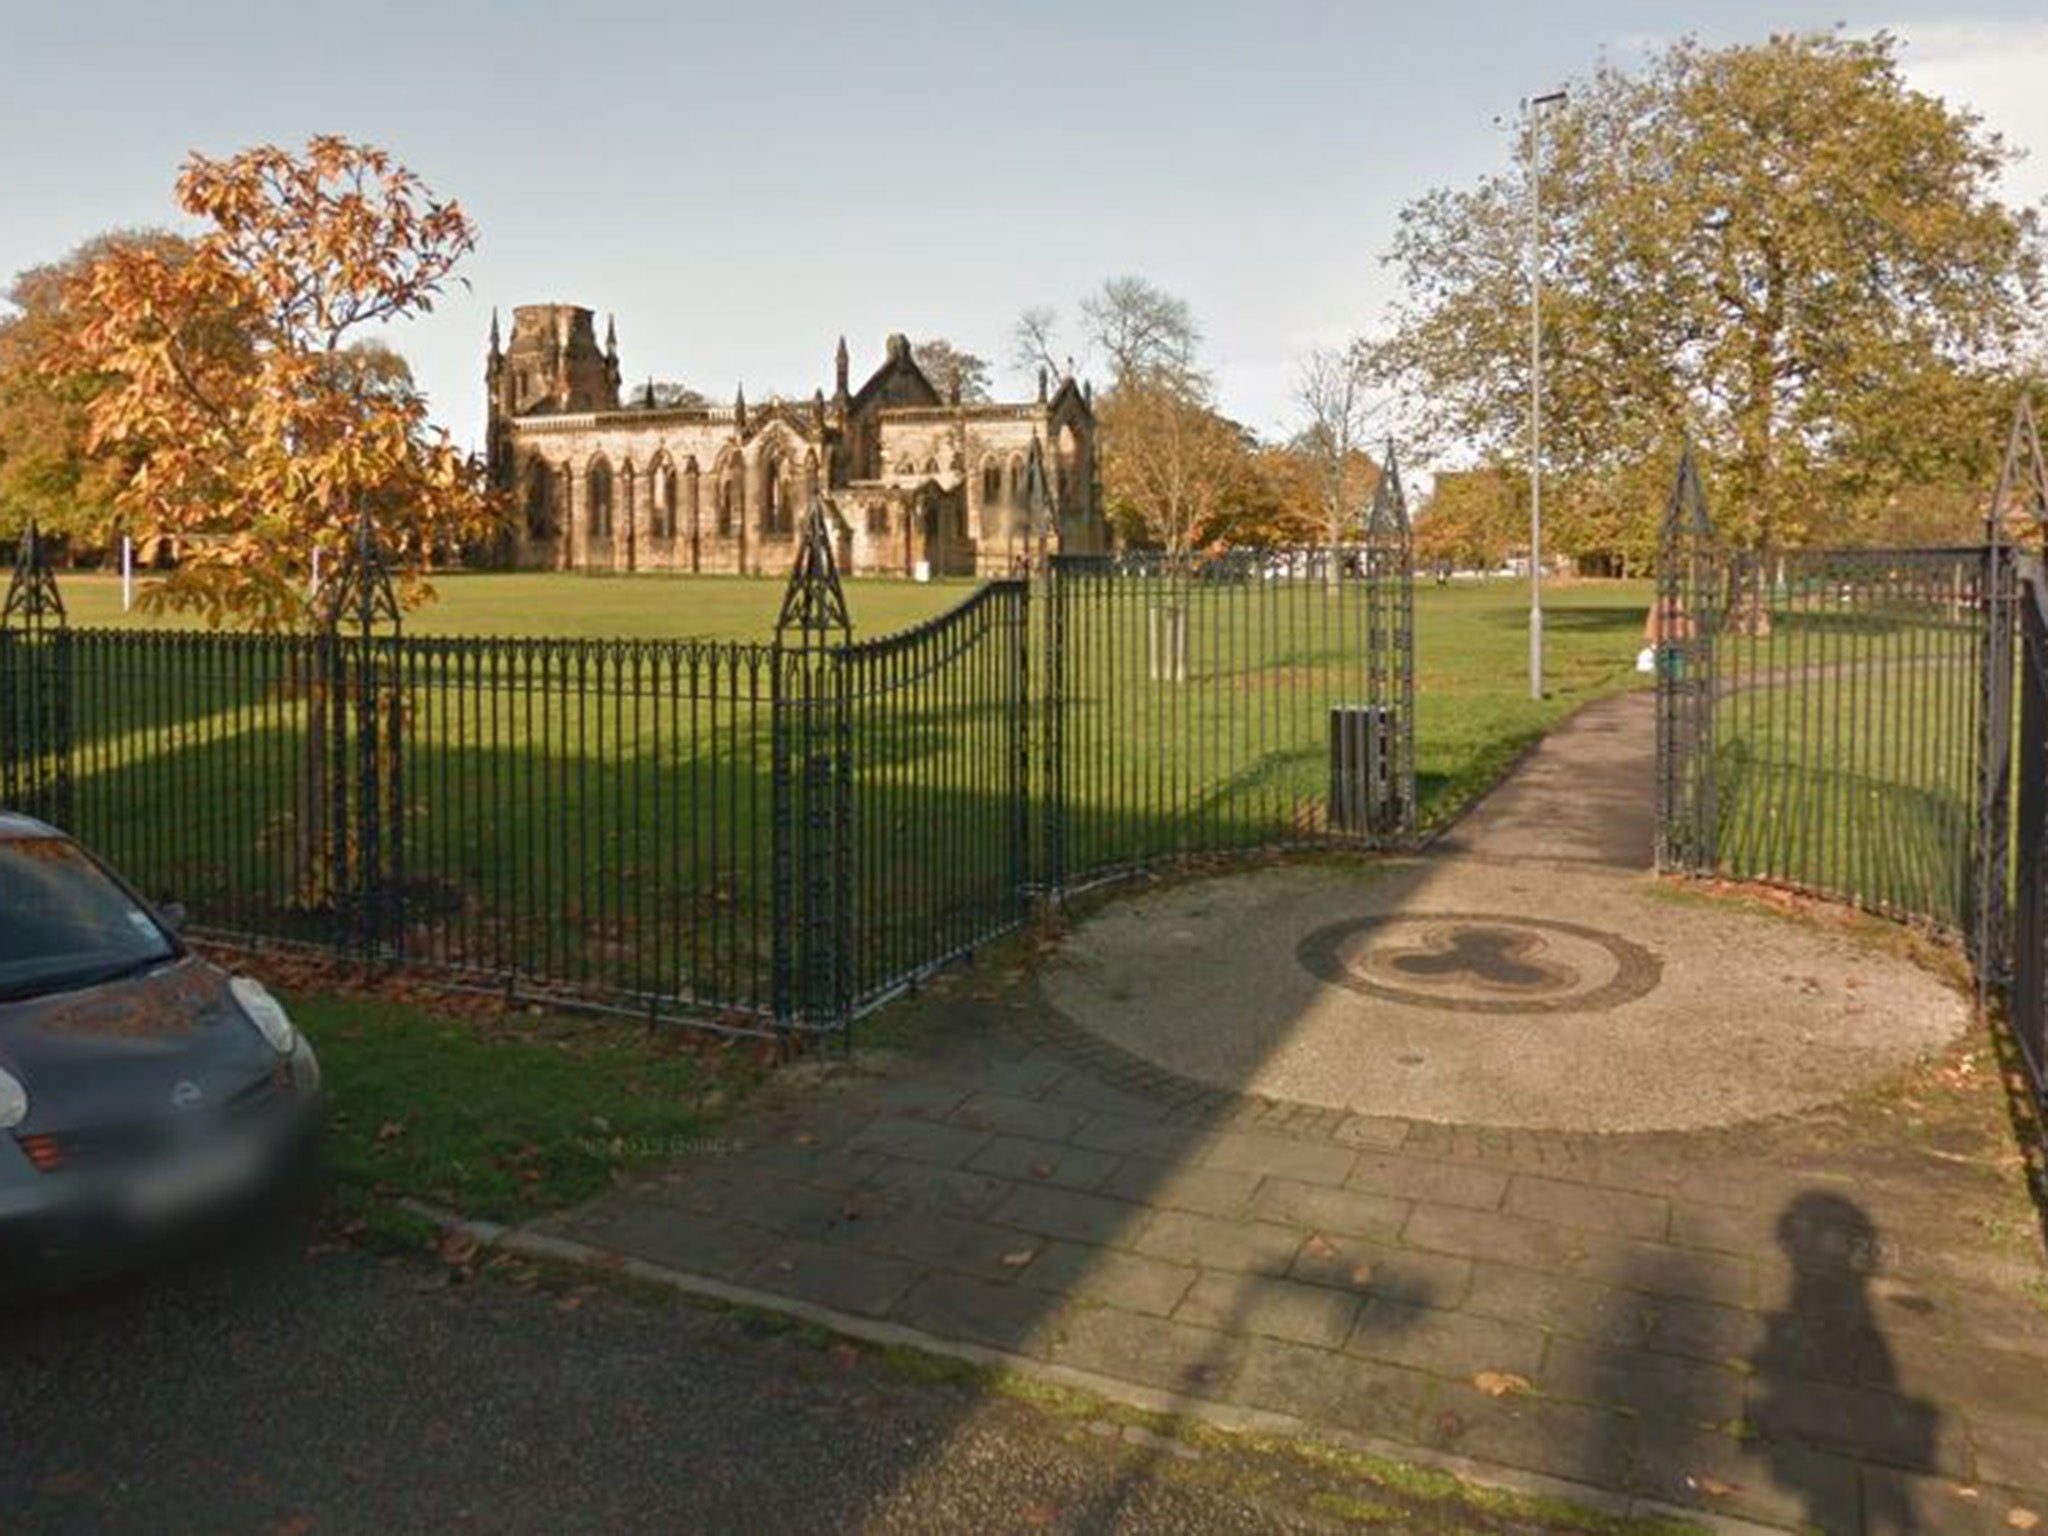 The attack happened at Holy Trinity churchyard in the early hours of Wednesday morning